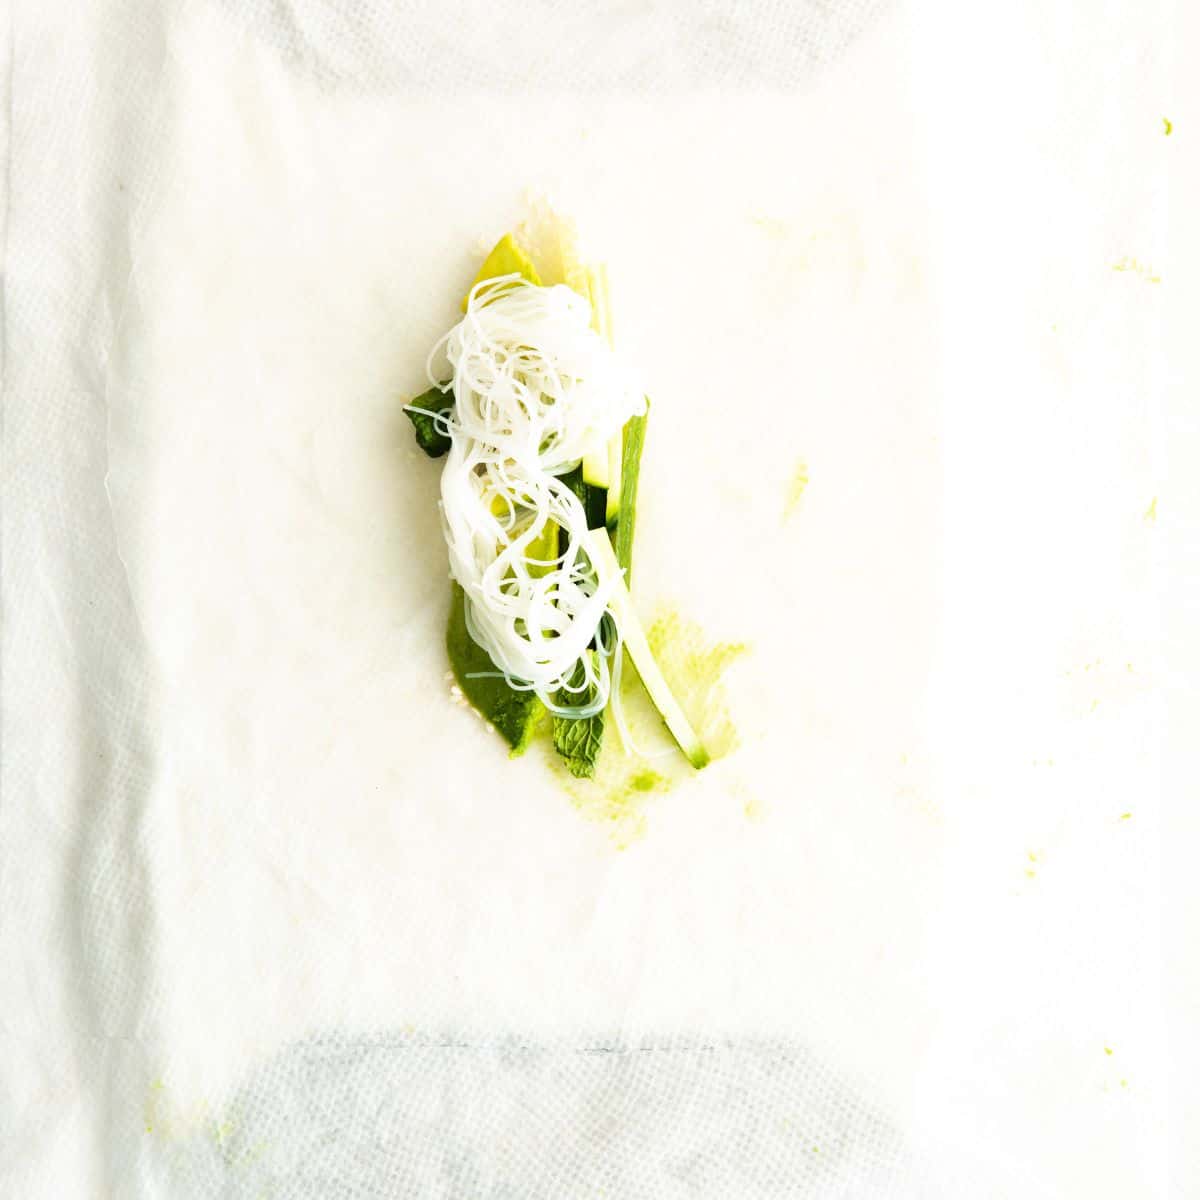 A rice wrapper with avocados and rice noodles.